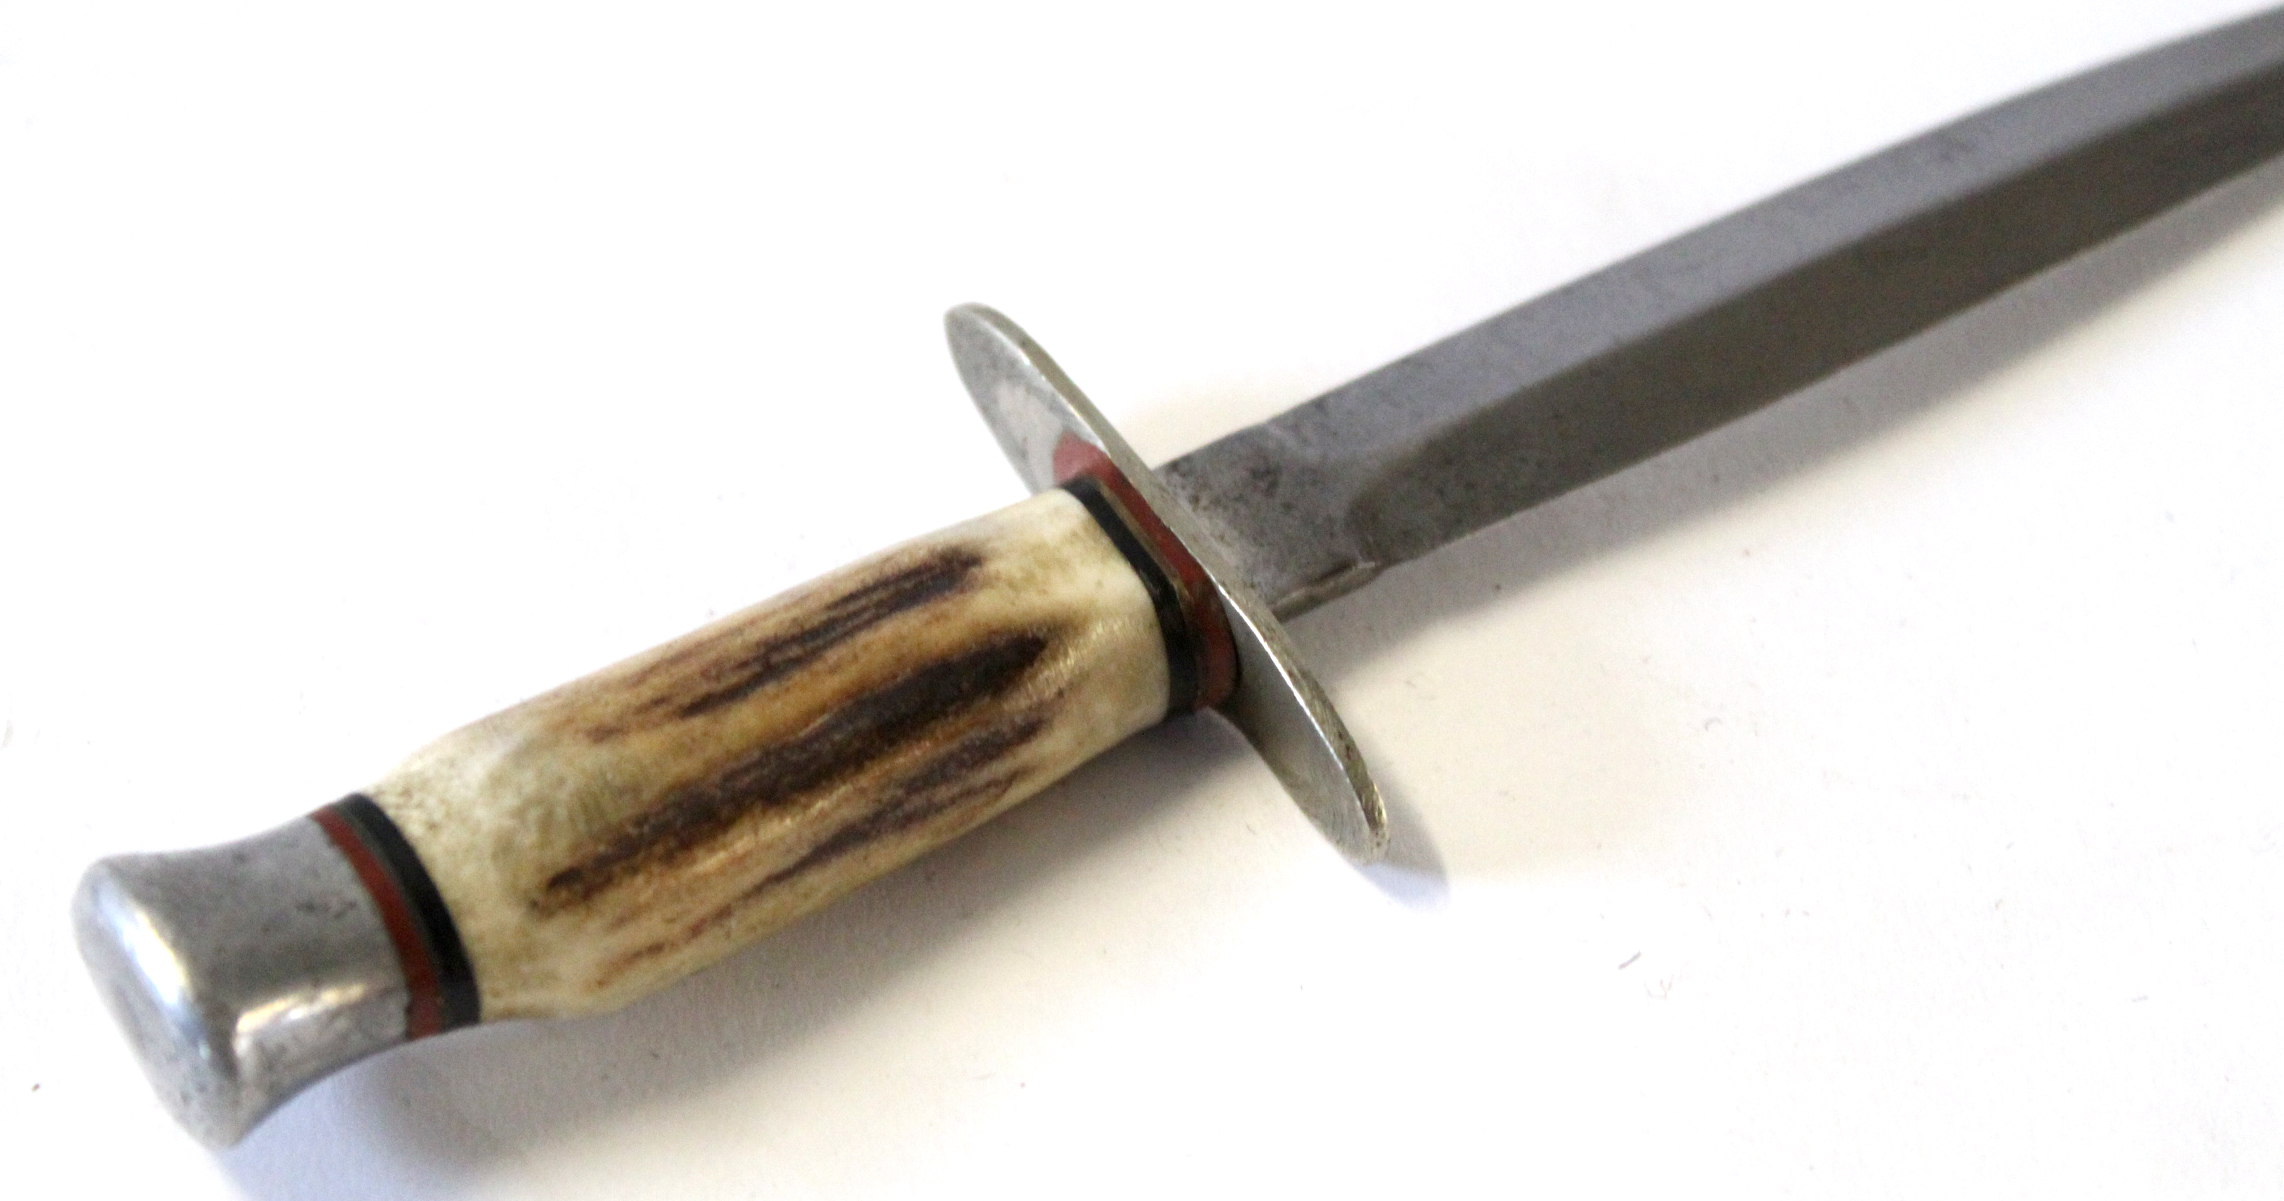 Small dagger with bone handle, the blade marked William Rodgers - Sheffield - Image 2 of 4